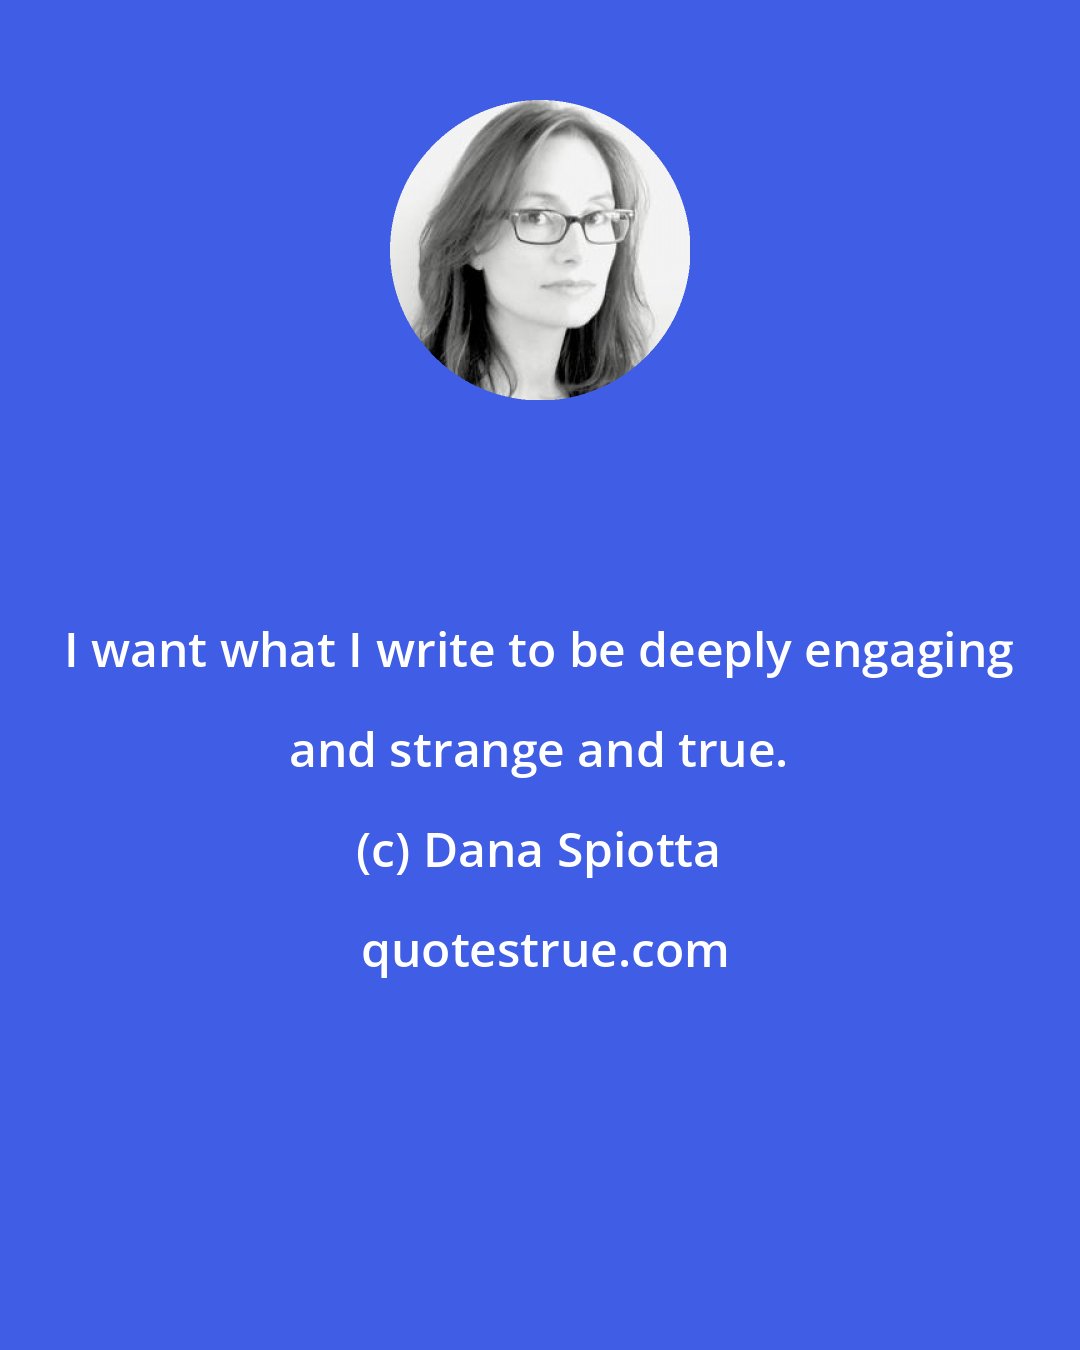 Dana Spiotta: I want what I write to be deeply engaging and strange and true.